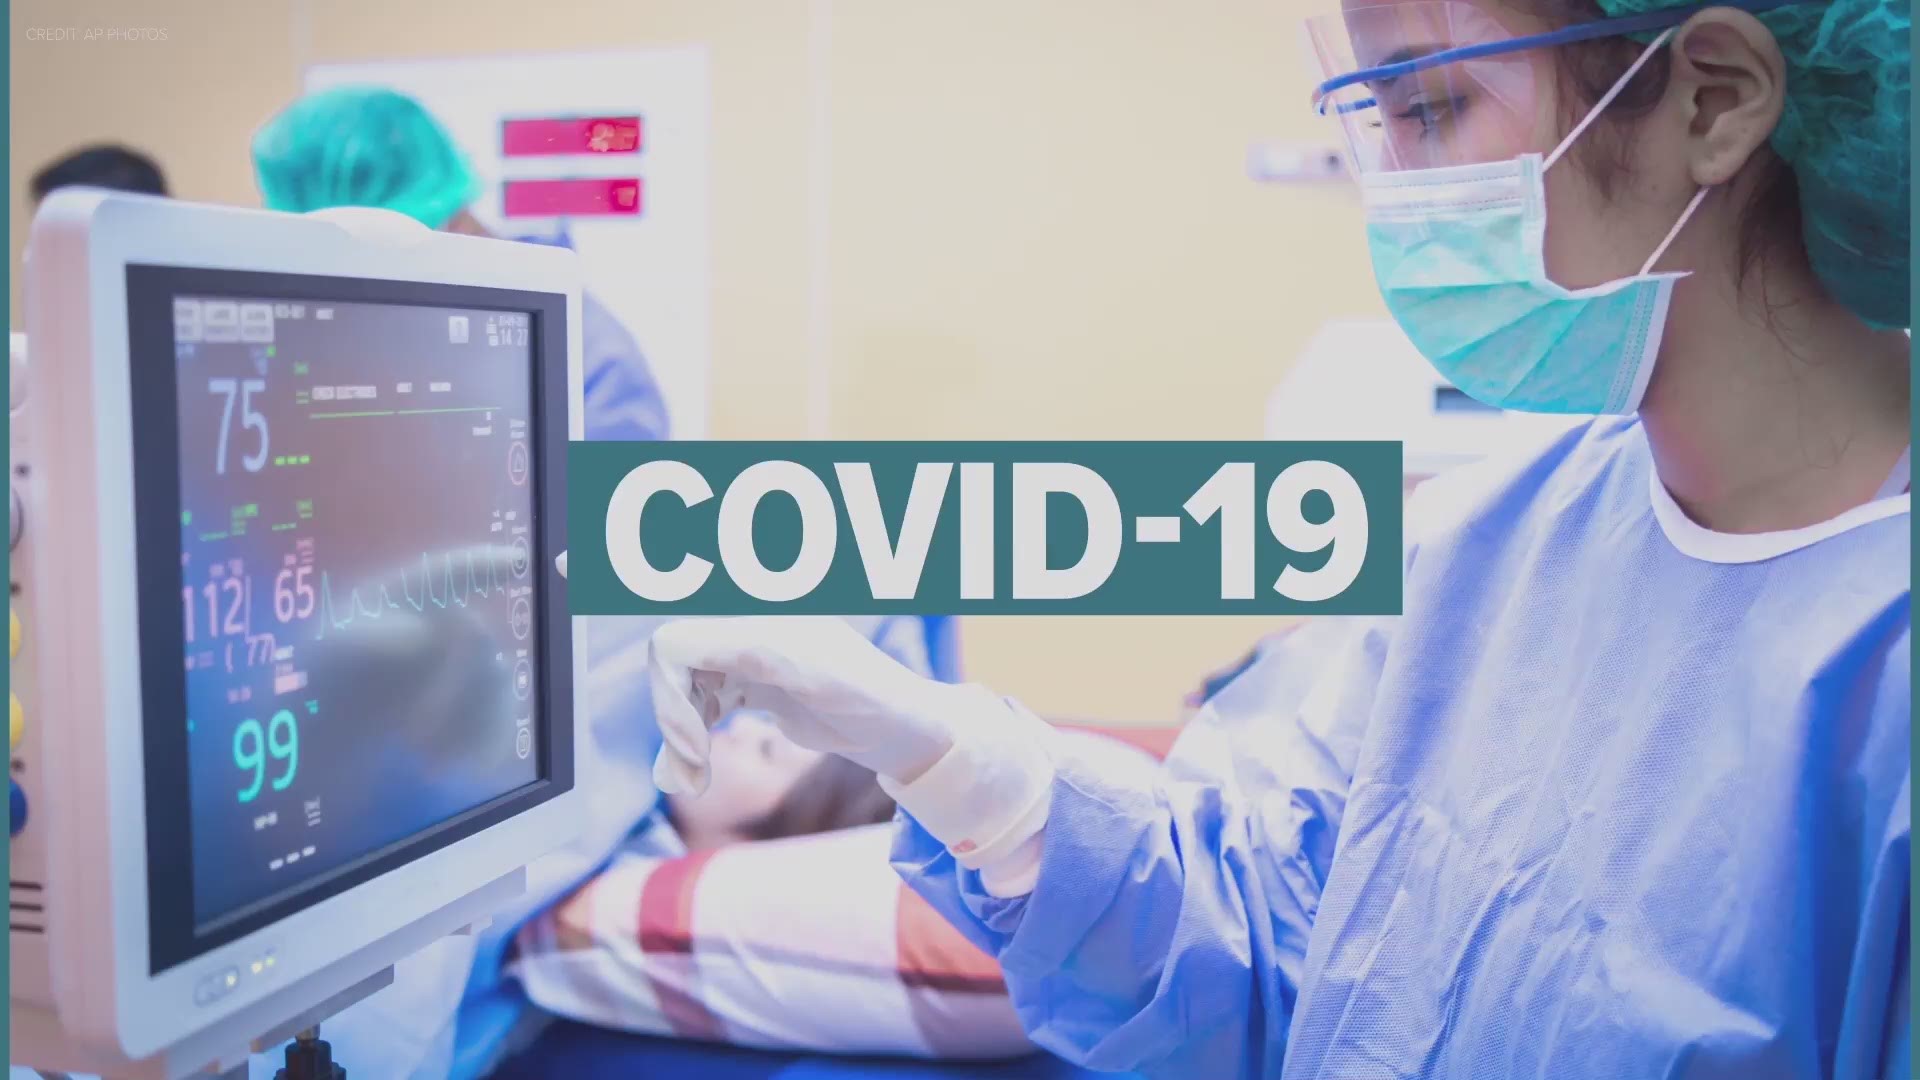 The number of coronavirus cases in Arizona has reached 7,962 as of Friday, with 330 coronavirus-related deaths. Here's the latest COVID-19 update.